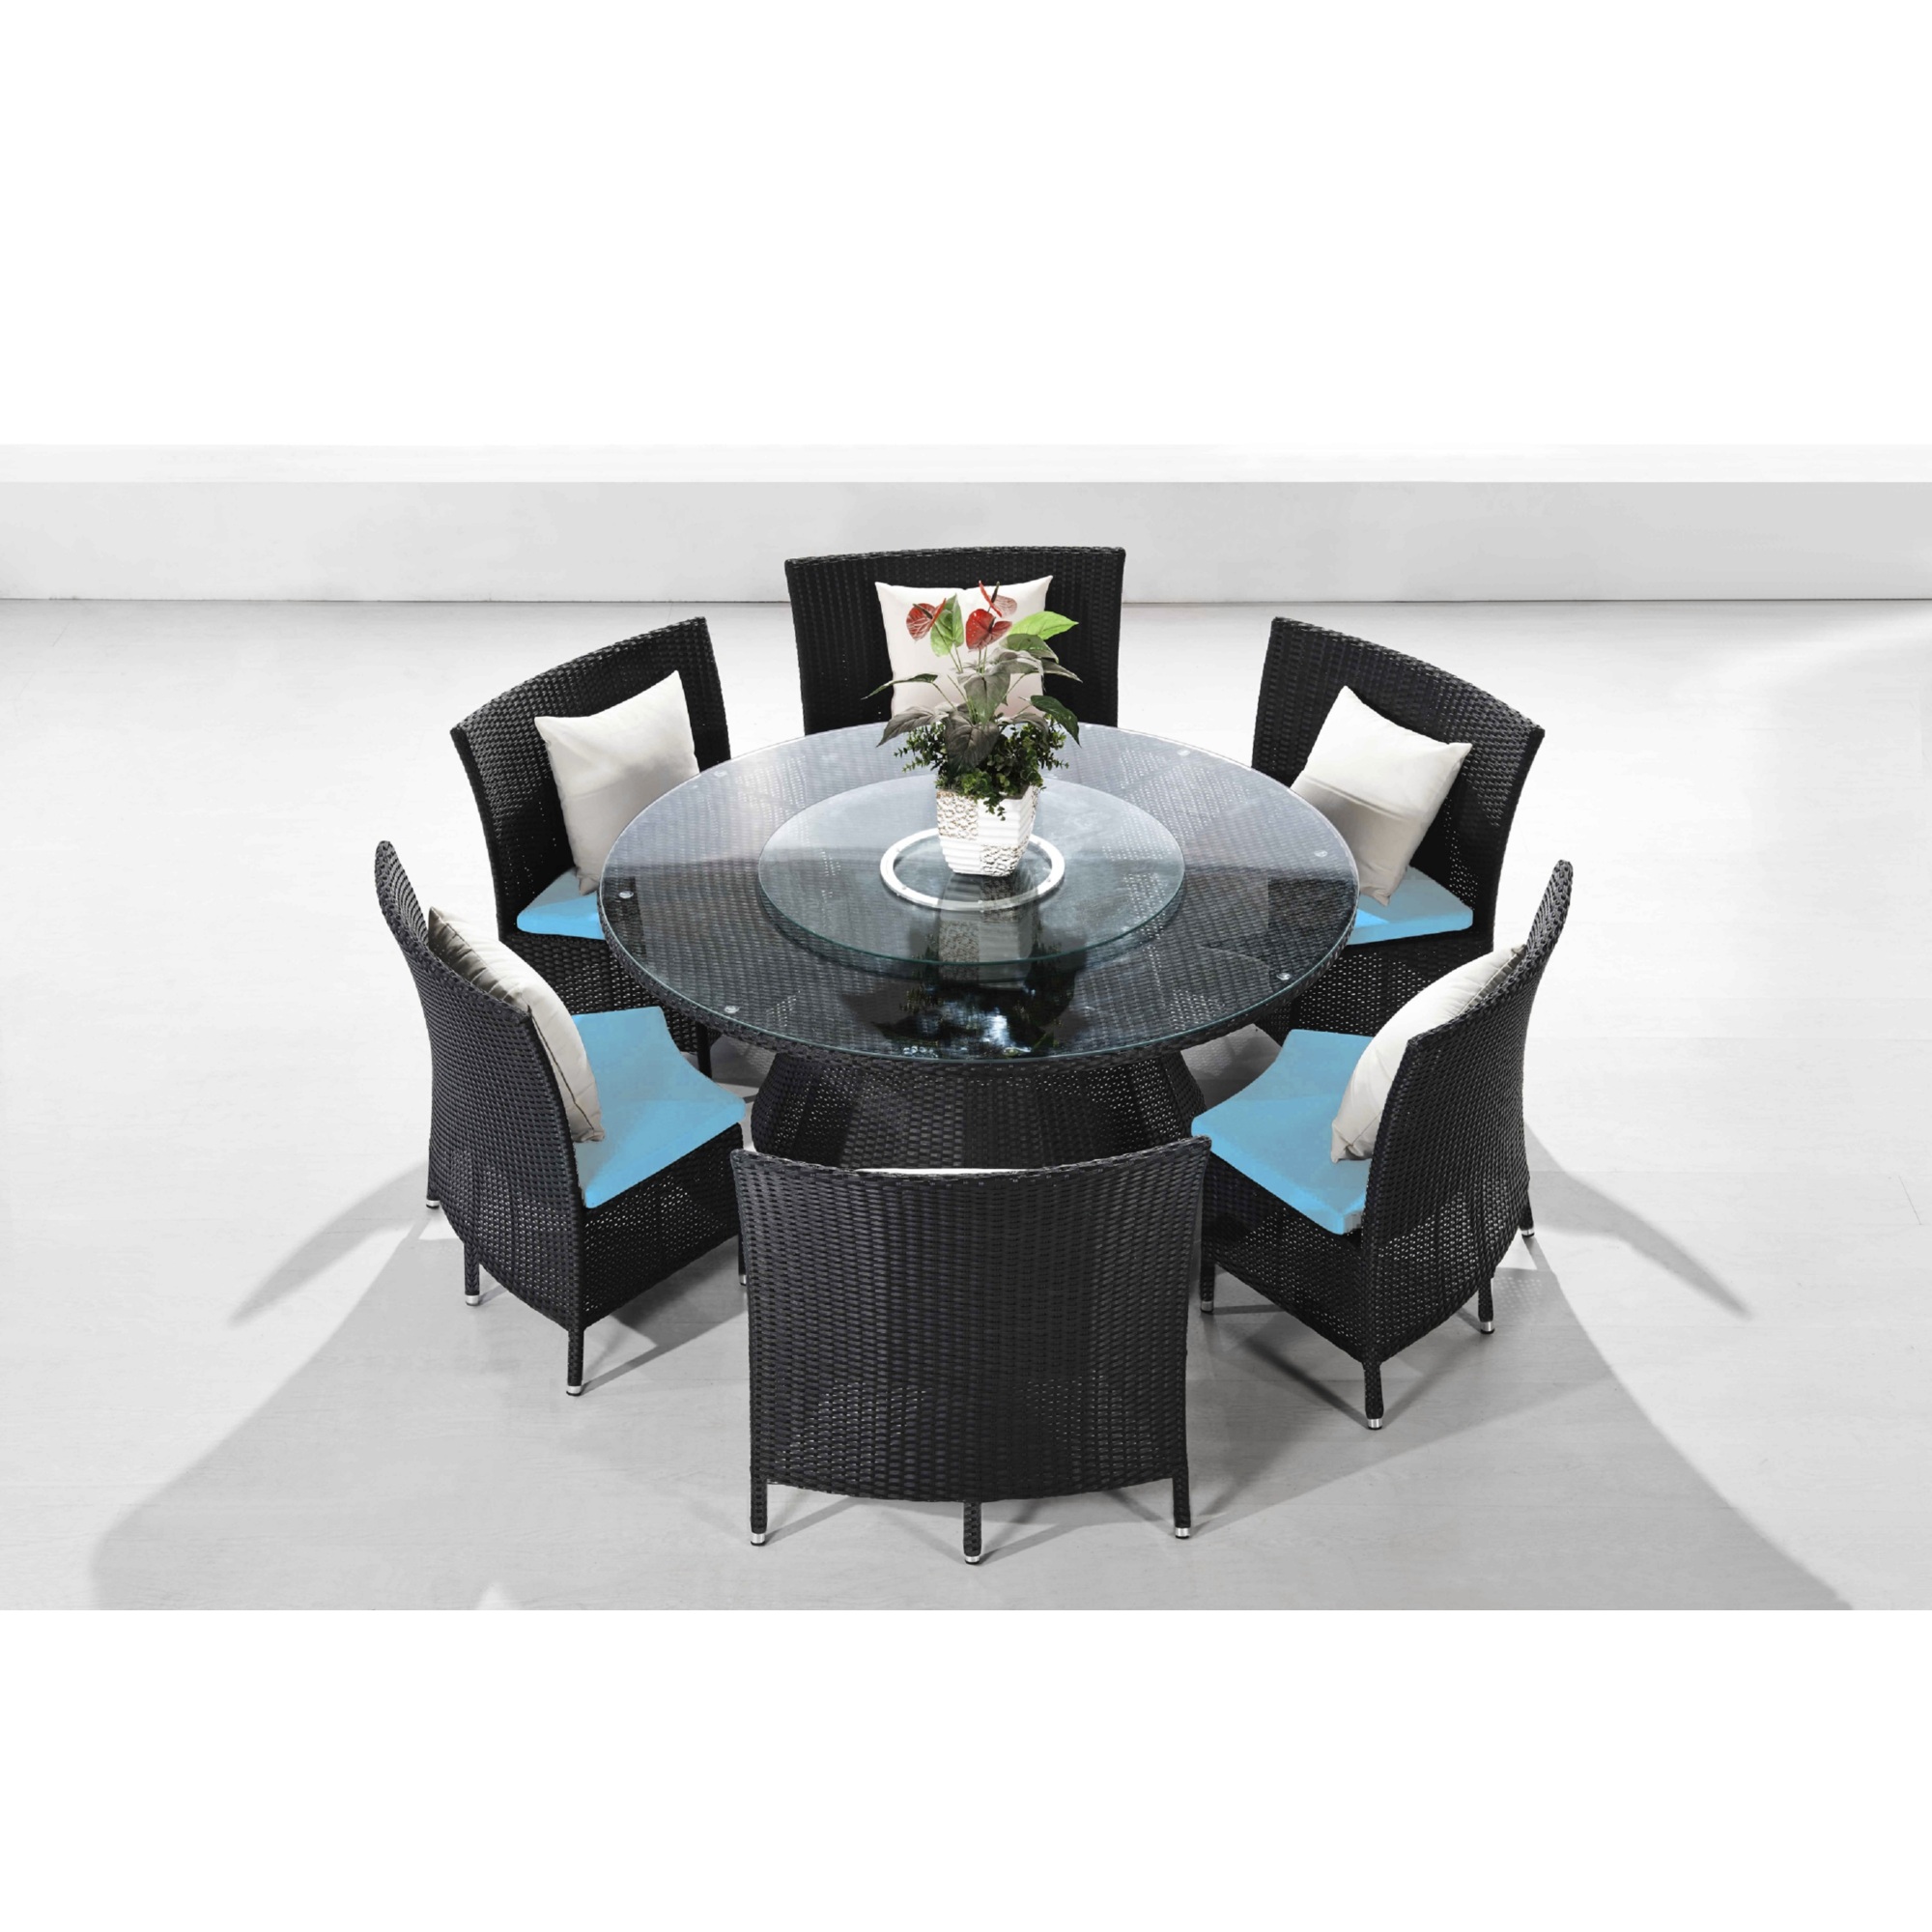 Manhattan Comfort, Nightingdale Black 7Pc Outdoor Dining Set Blue, Pieces (qty.) 7 Primary Color Blue, Seating Capacity 6 Model OD-DS001